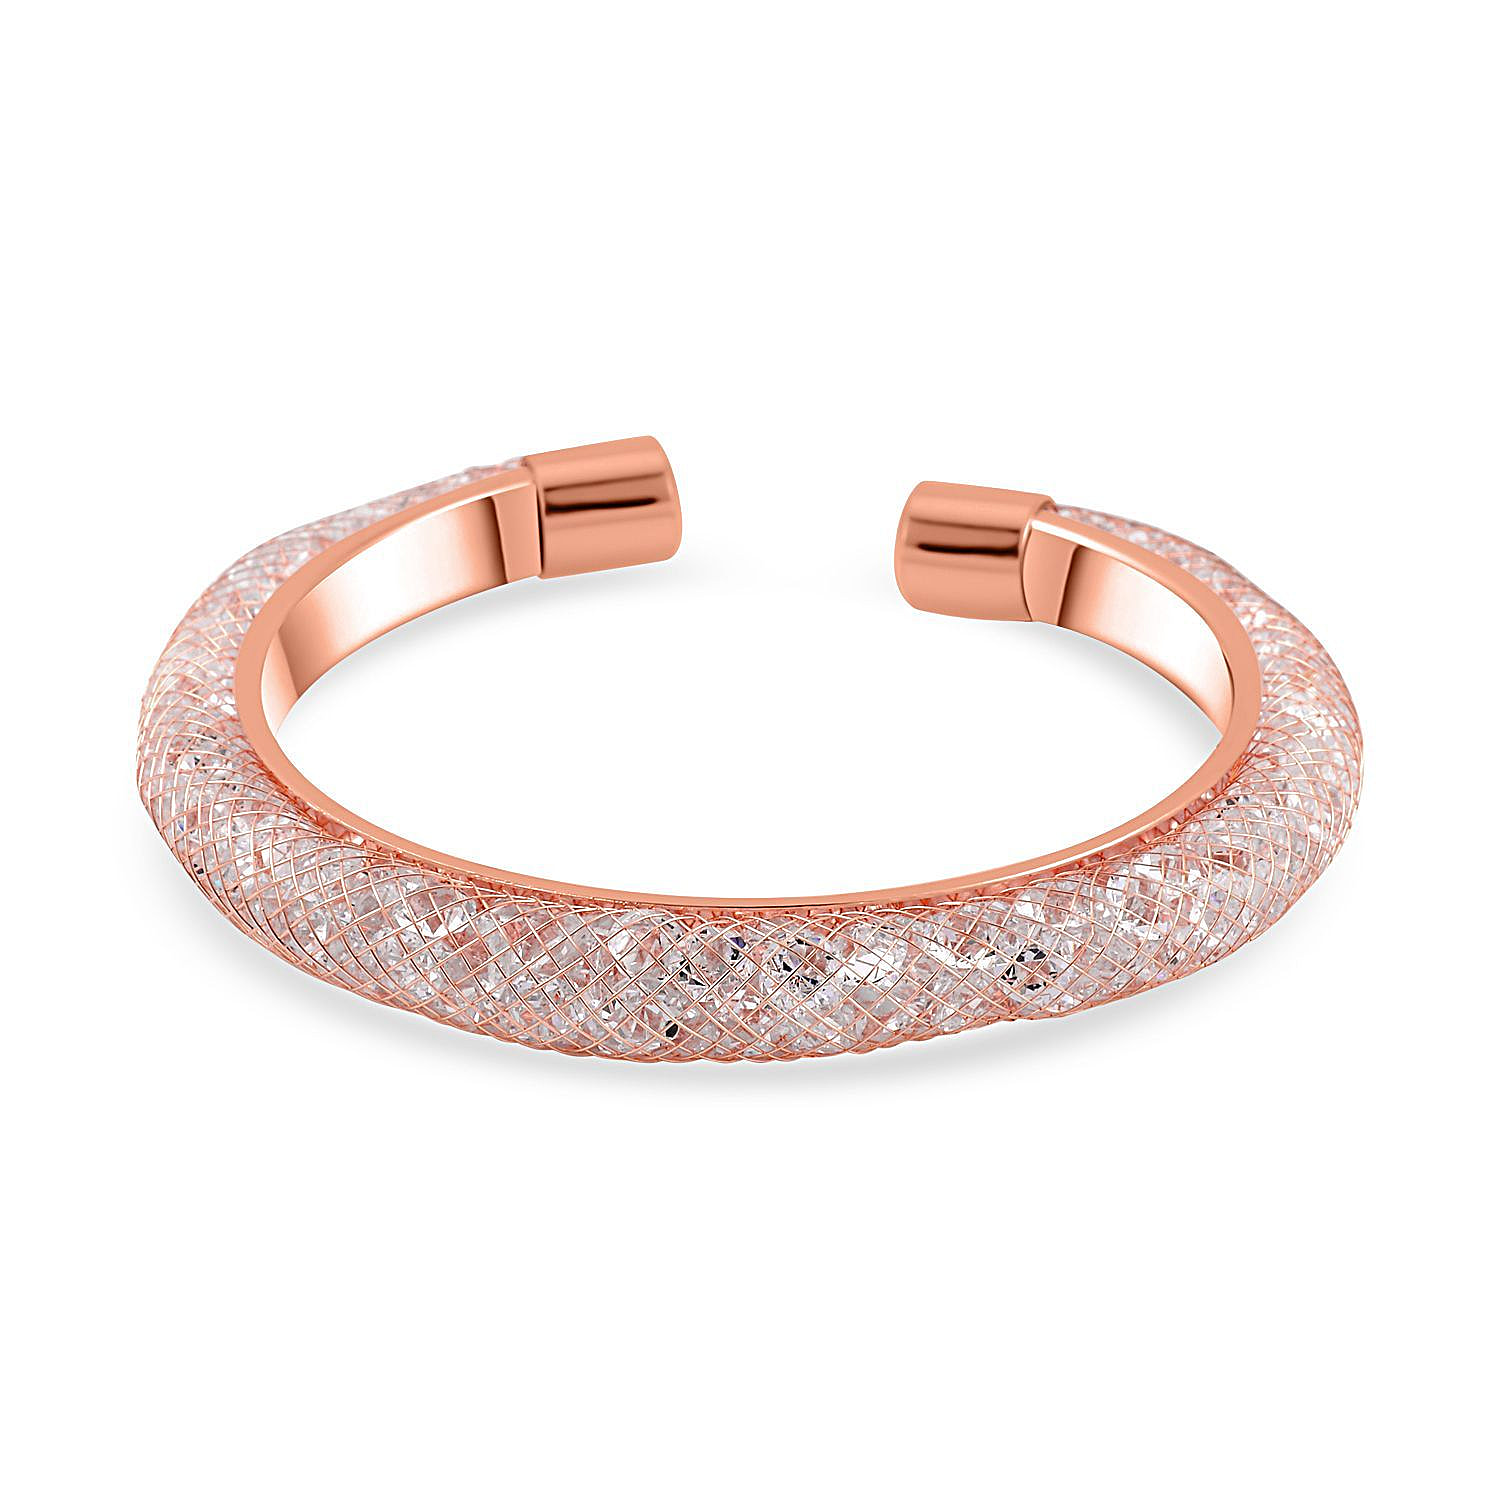 NY Close Out - White Austrian Crystal Bangle (Size 7) in Rose Gold Tone